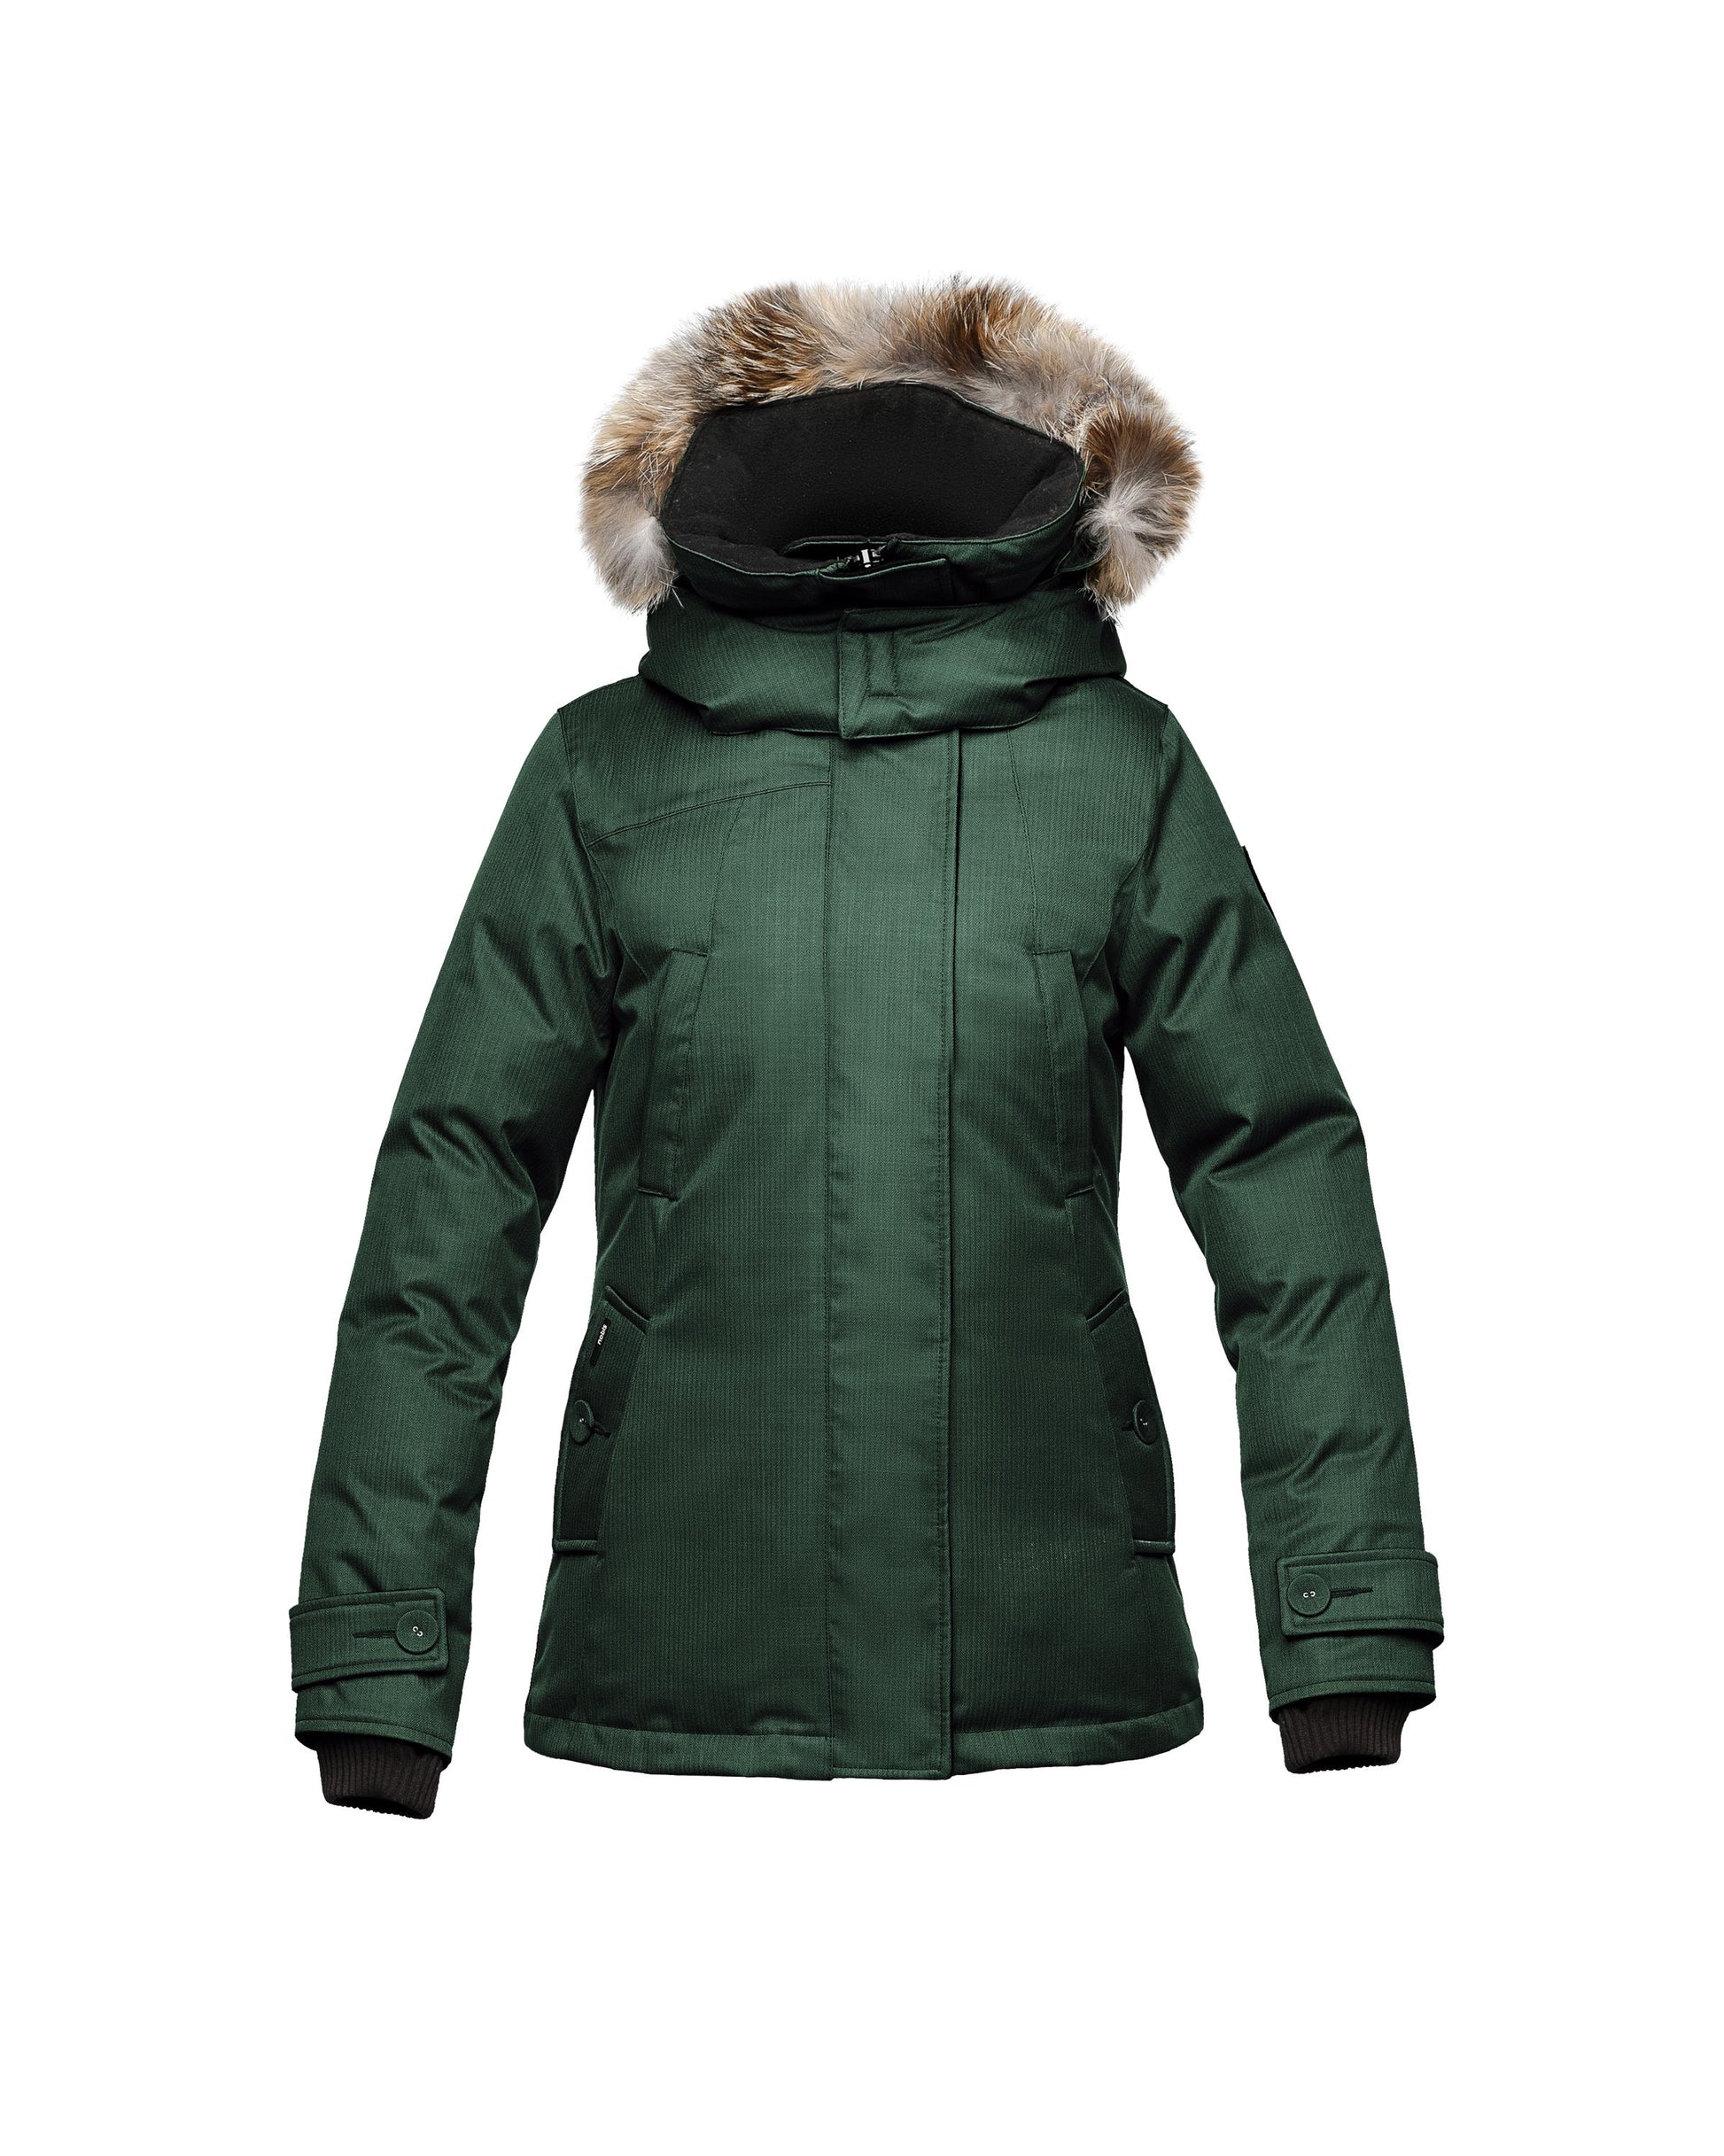 Women's down filled waist length parka with removable fur trim and removable hood in CH Forest